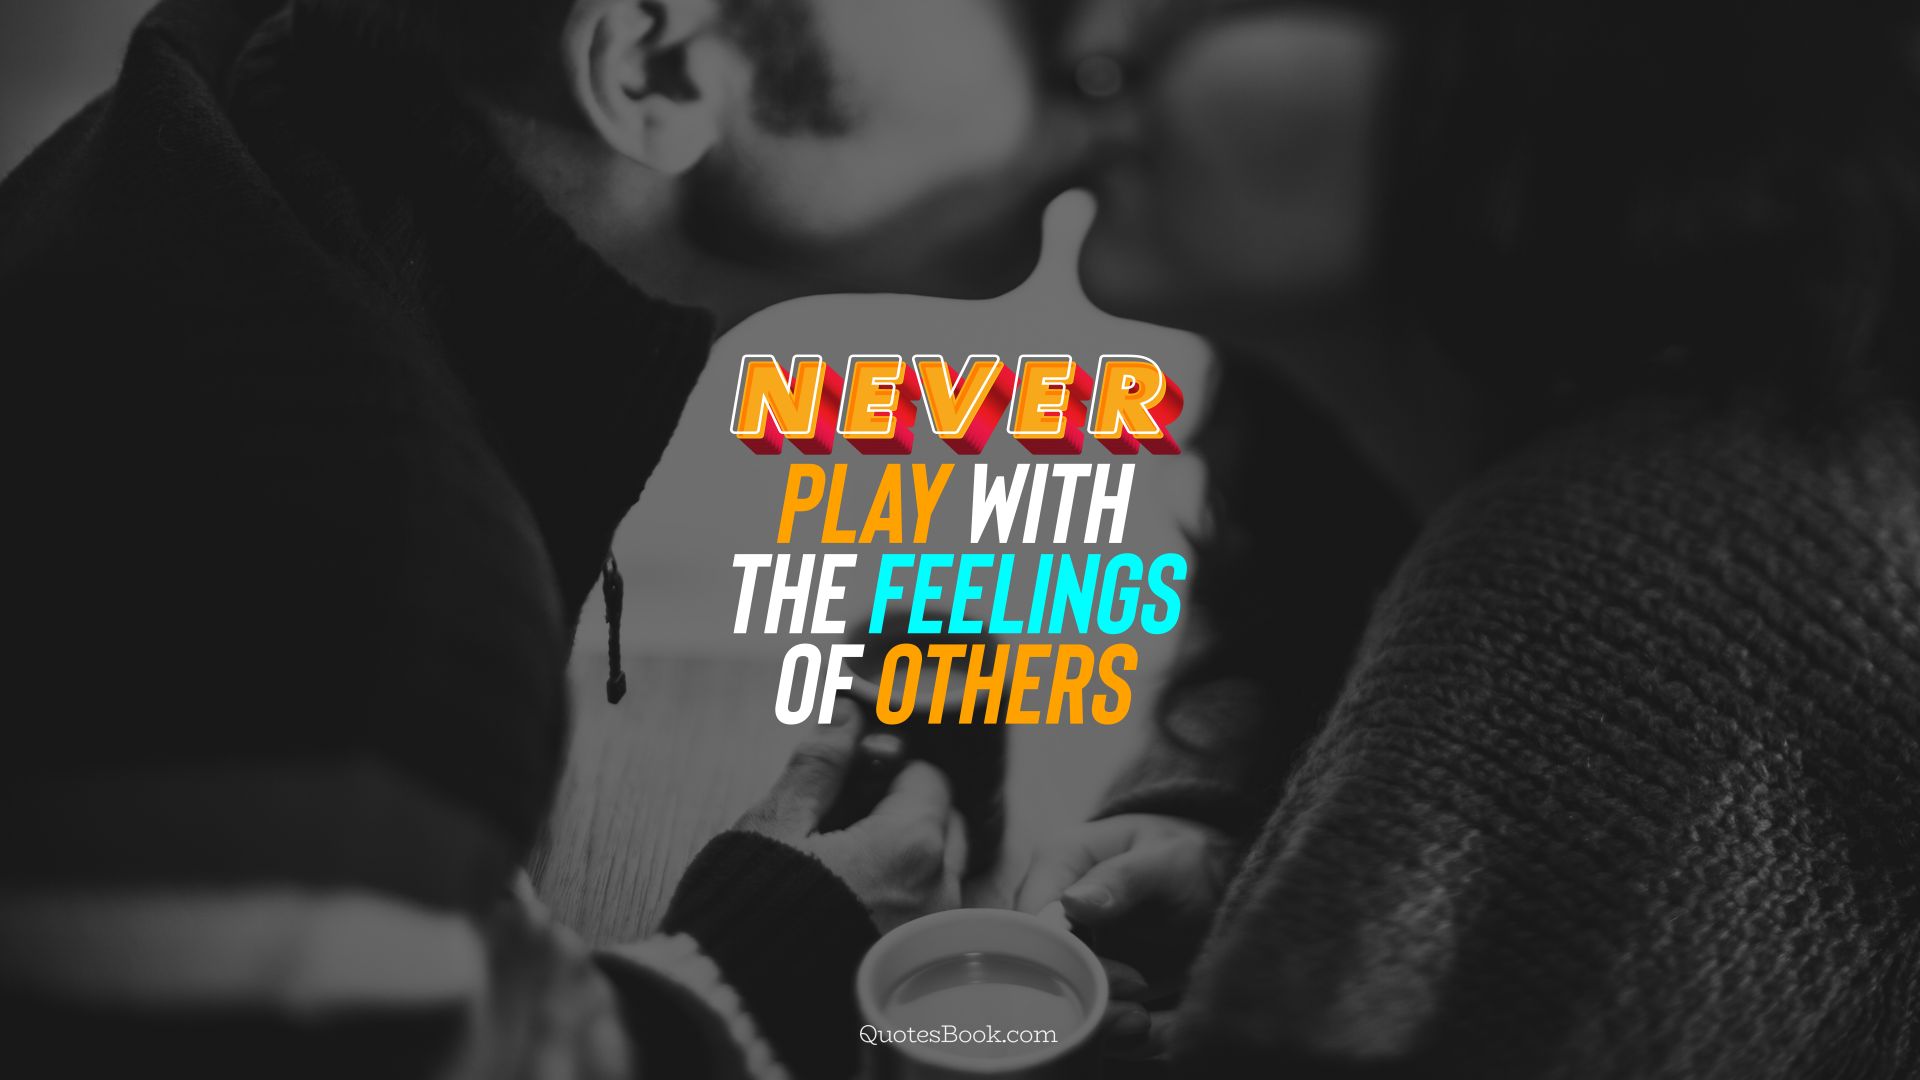 Never play with the feelings of others. - Quote by QuotesBook